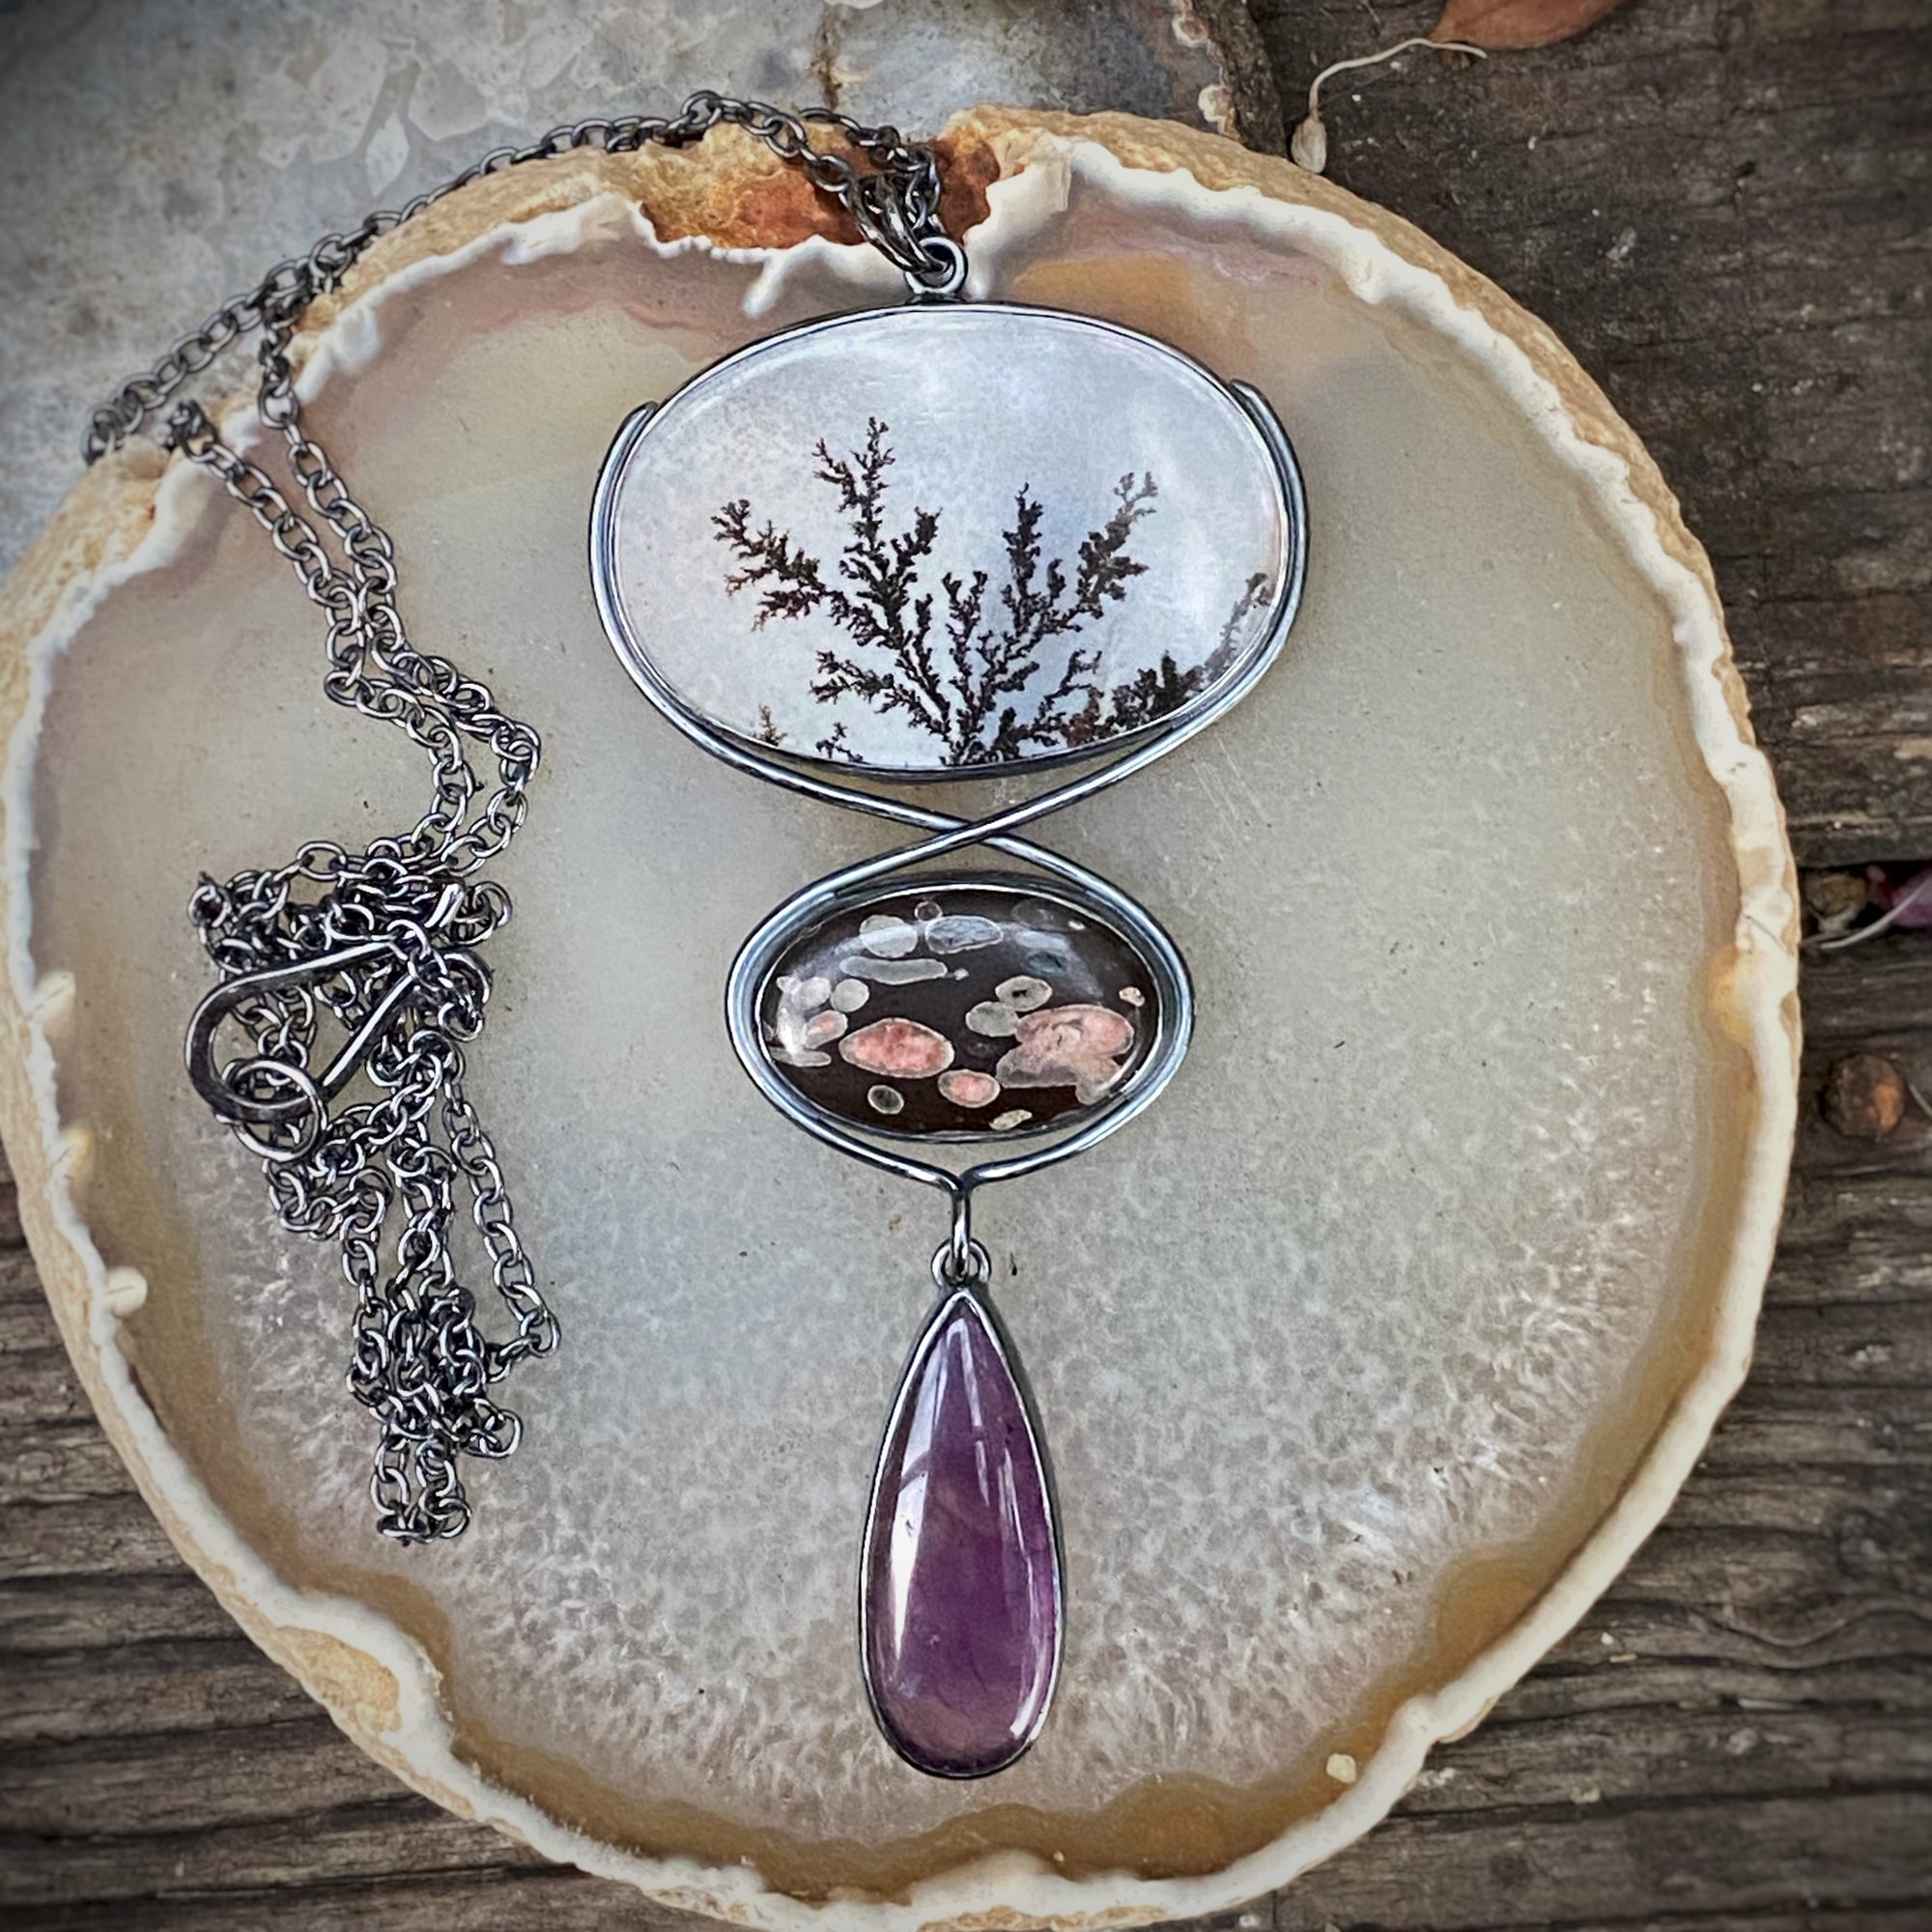 Dendritic Agate, Volcanic Porphyry, and Amethyst Necklace